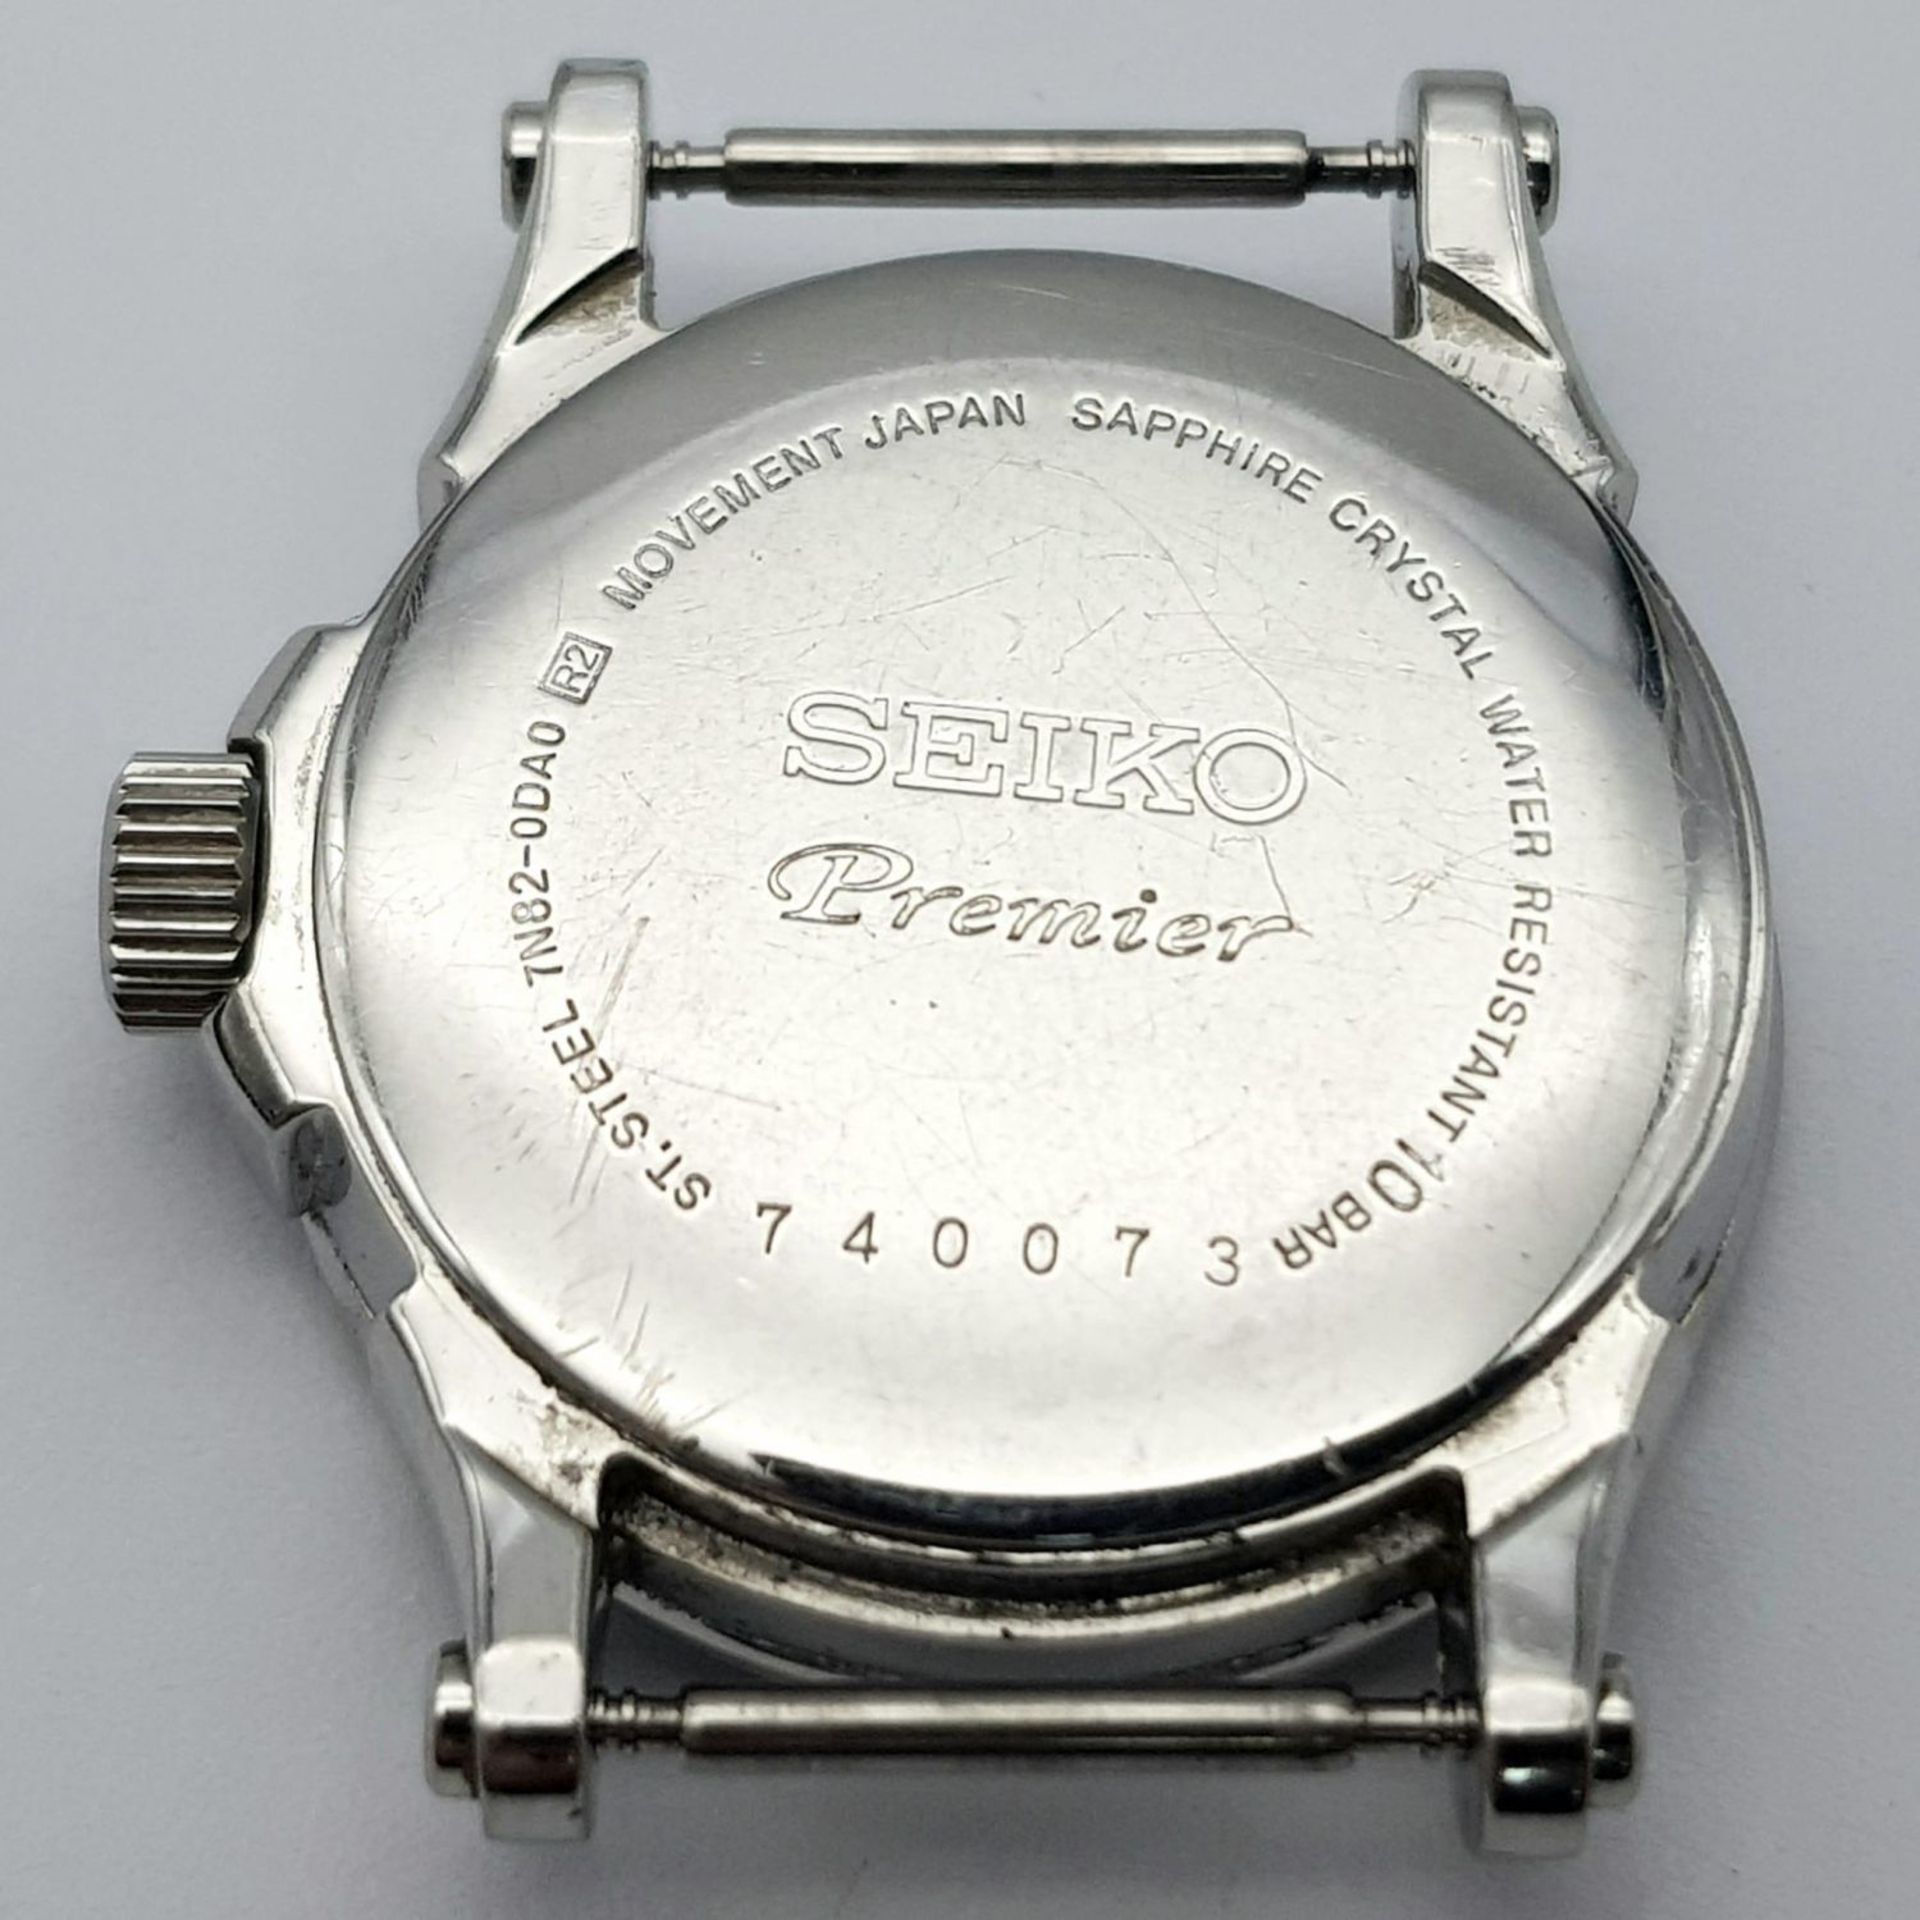 A Seiko Premier Ladies Diamond Watch Case. 27mm. Diamond bezel. Mother of pearl dial. In working - Image 8 of 8